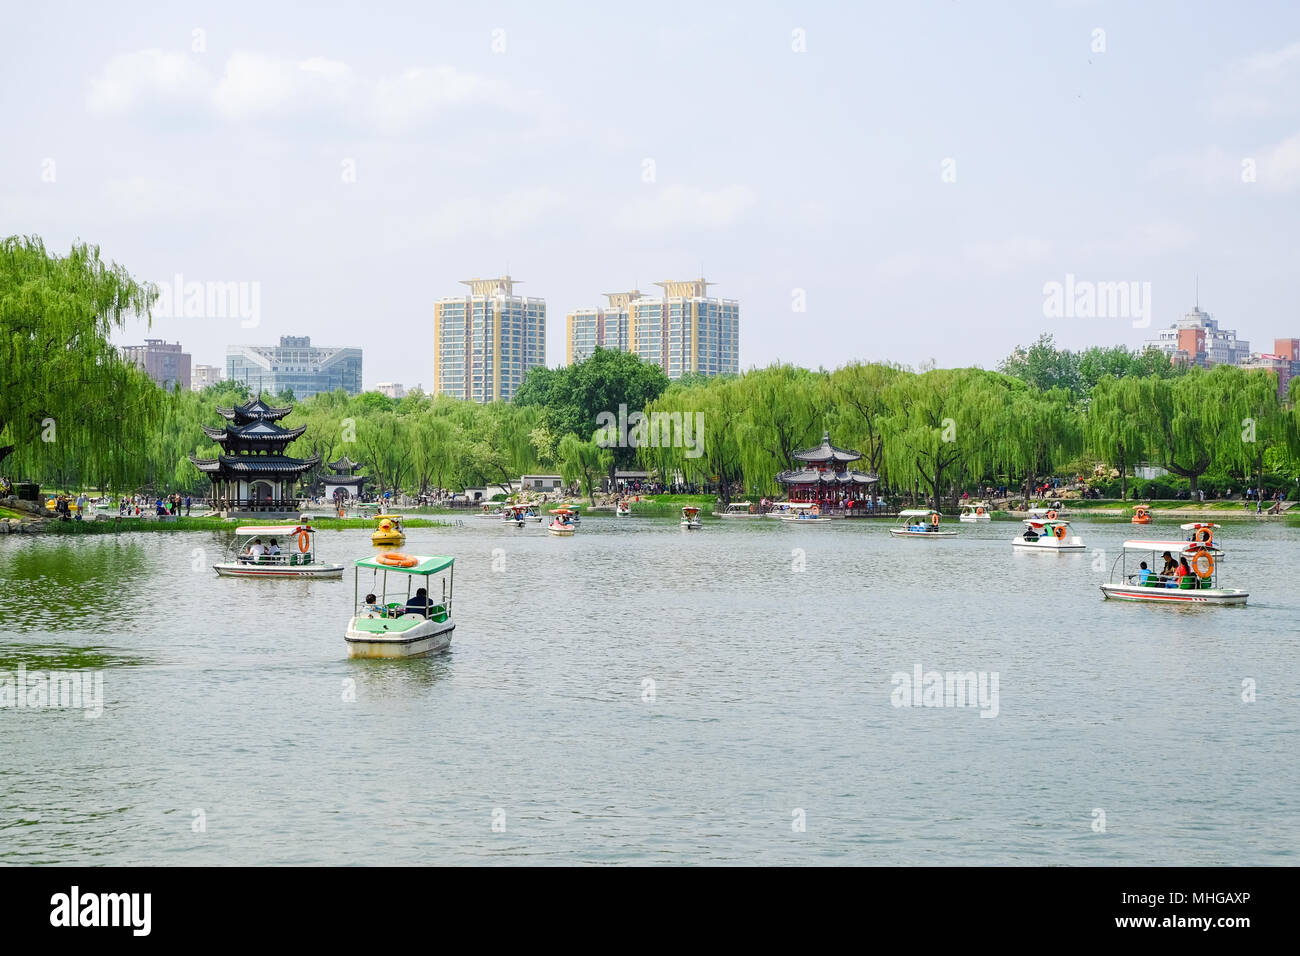 BEIJING, CHINA - APRIL 30, 2018: People are taking a recreational boat ride in a park. Taoranting Park is a major city park located in Xicheng Distric Stock Photo